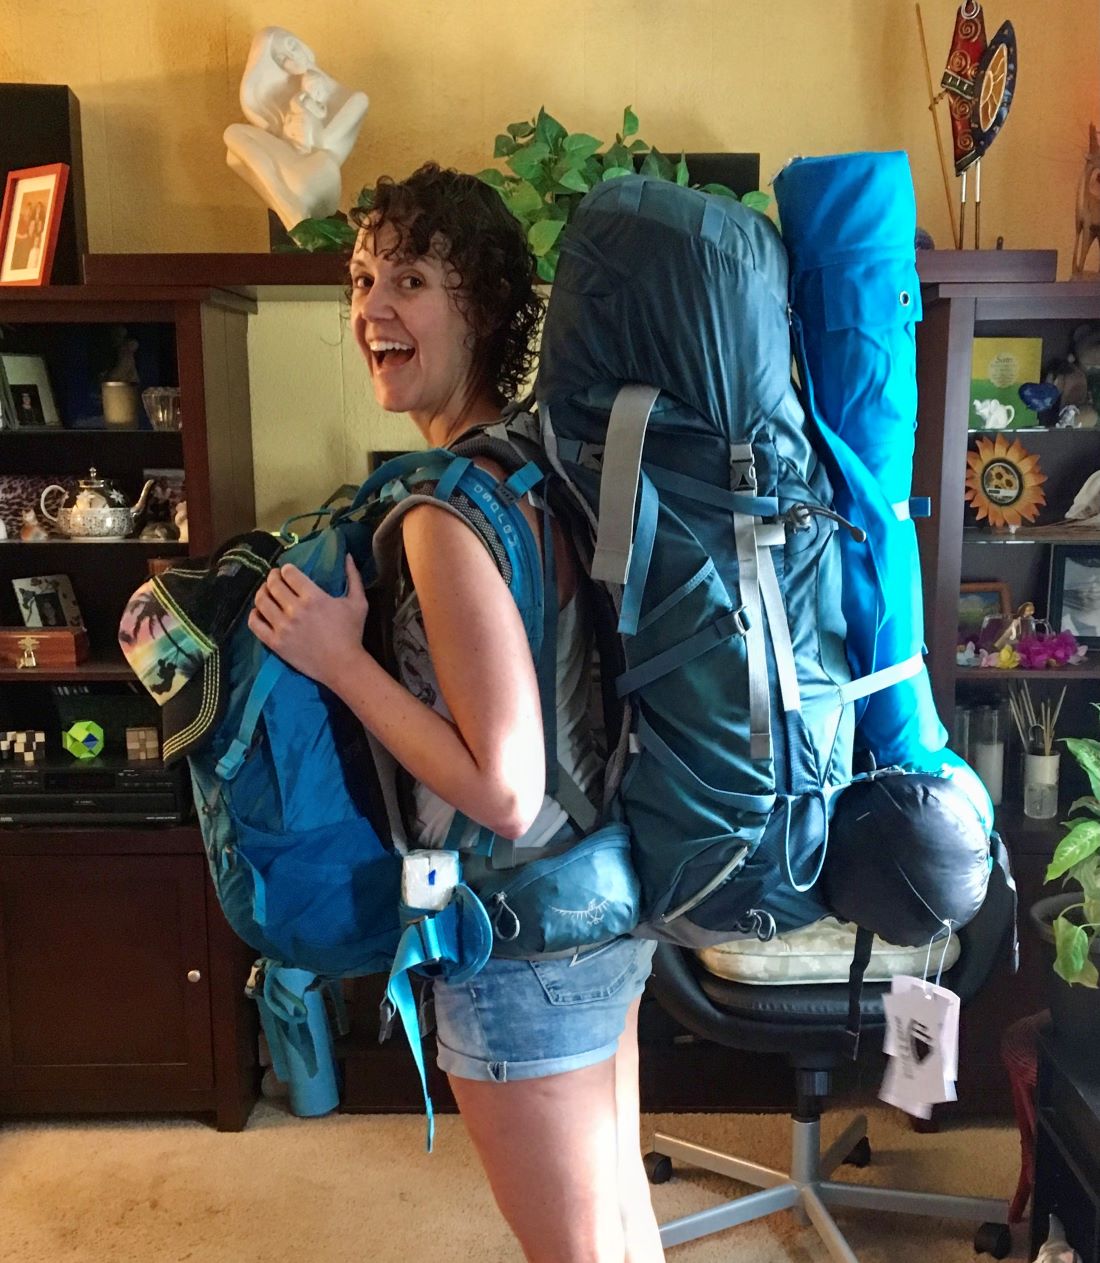 Amber Parle with two large backpacks ready for a trip